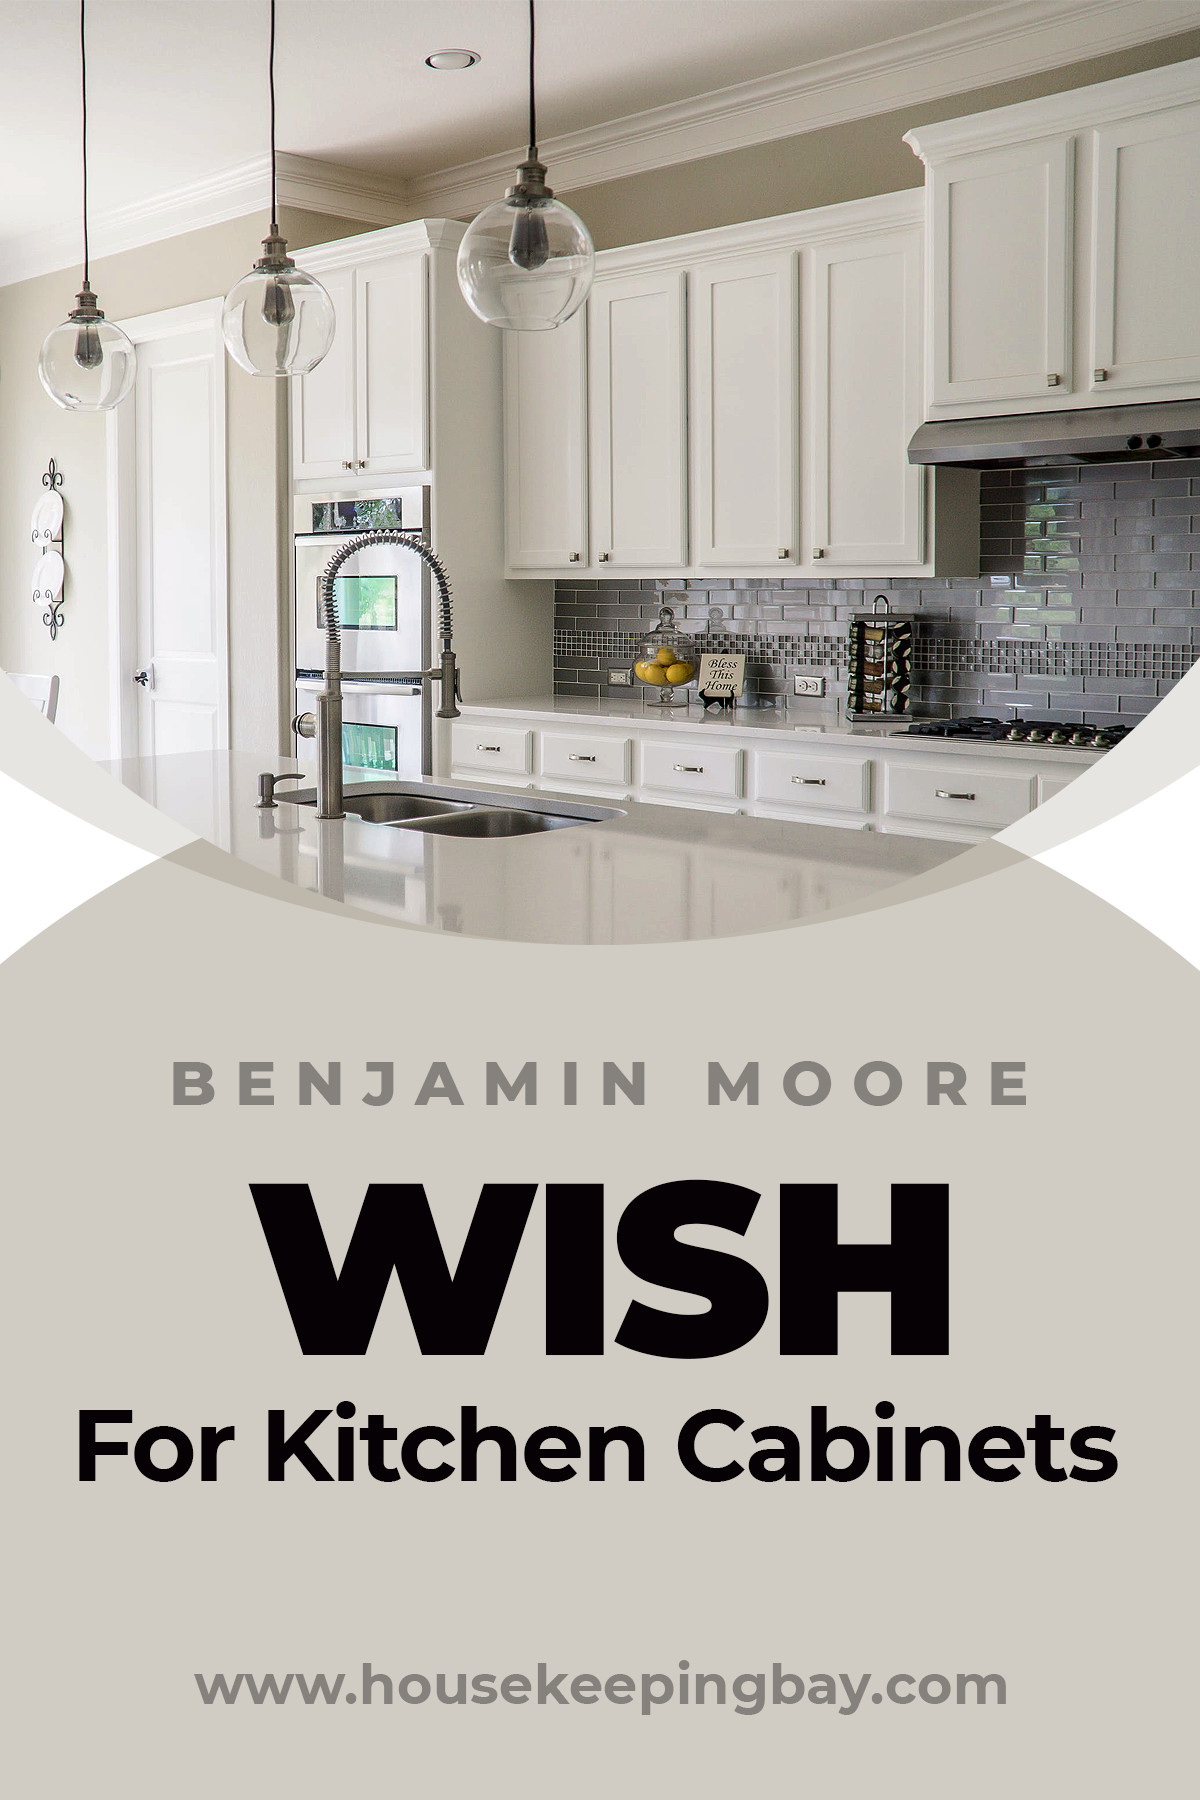 Benjamin Moore Wish For Kitchen Cabinets